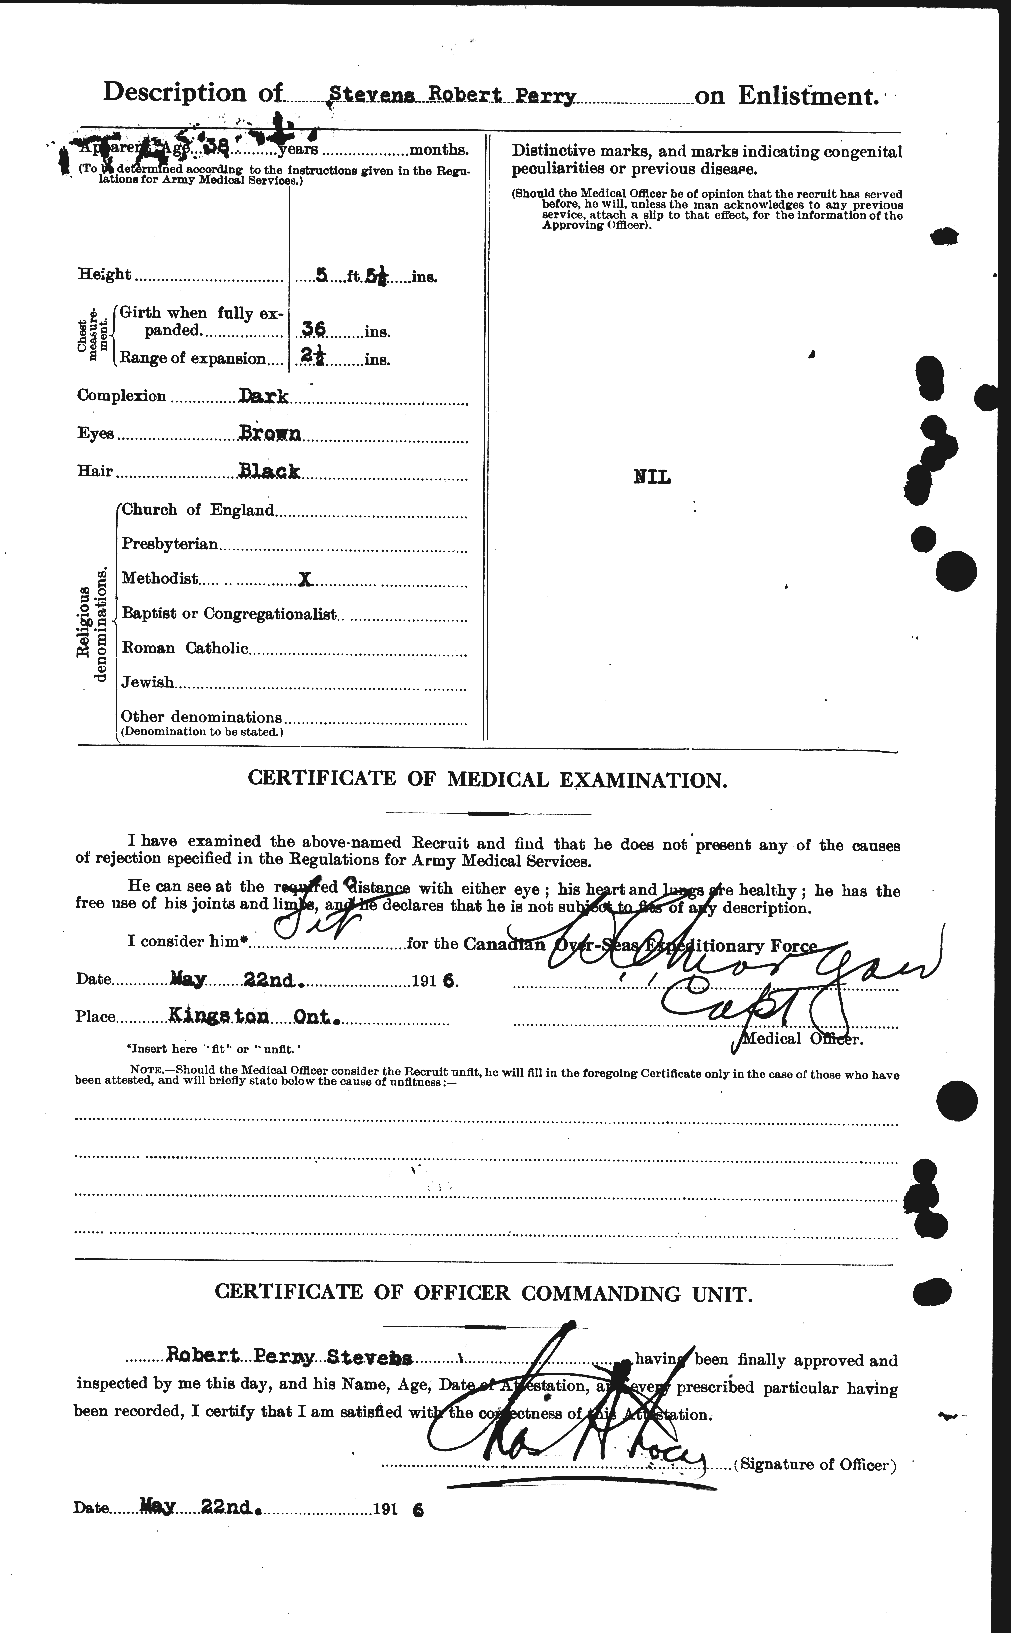 Personnel Records of the First World War - CEF 118299b